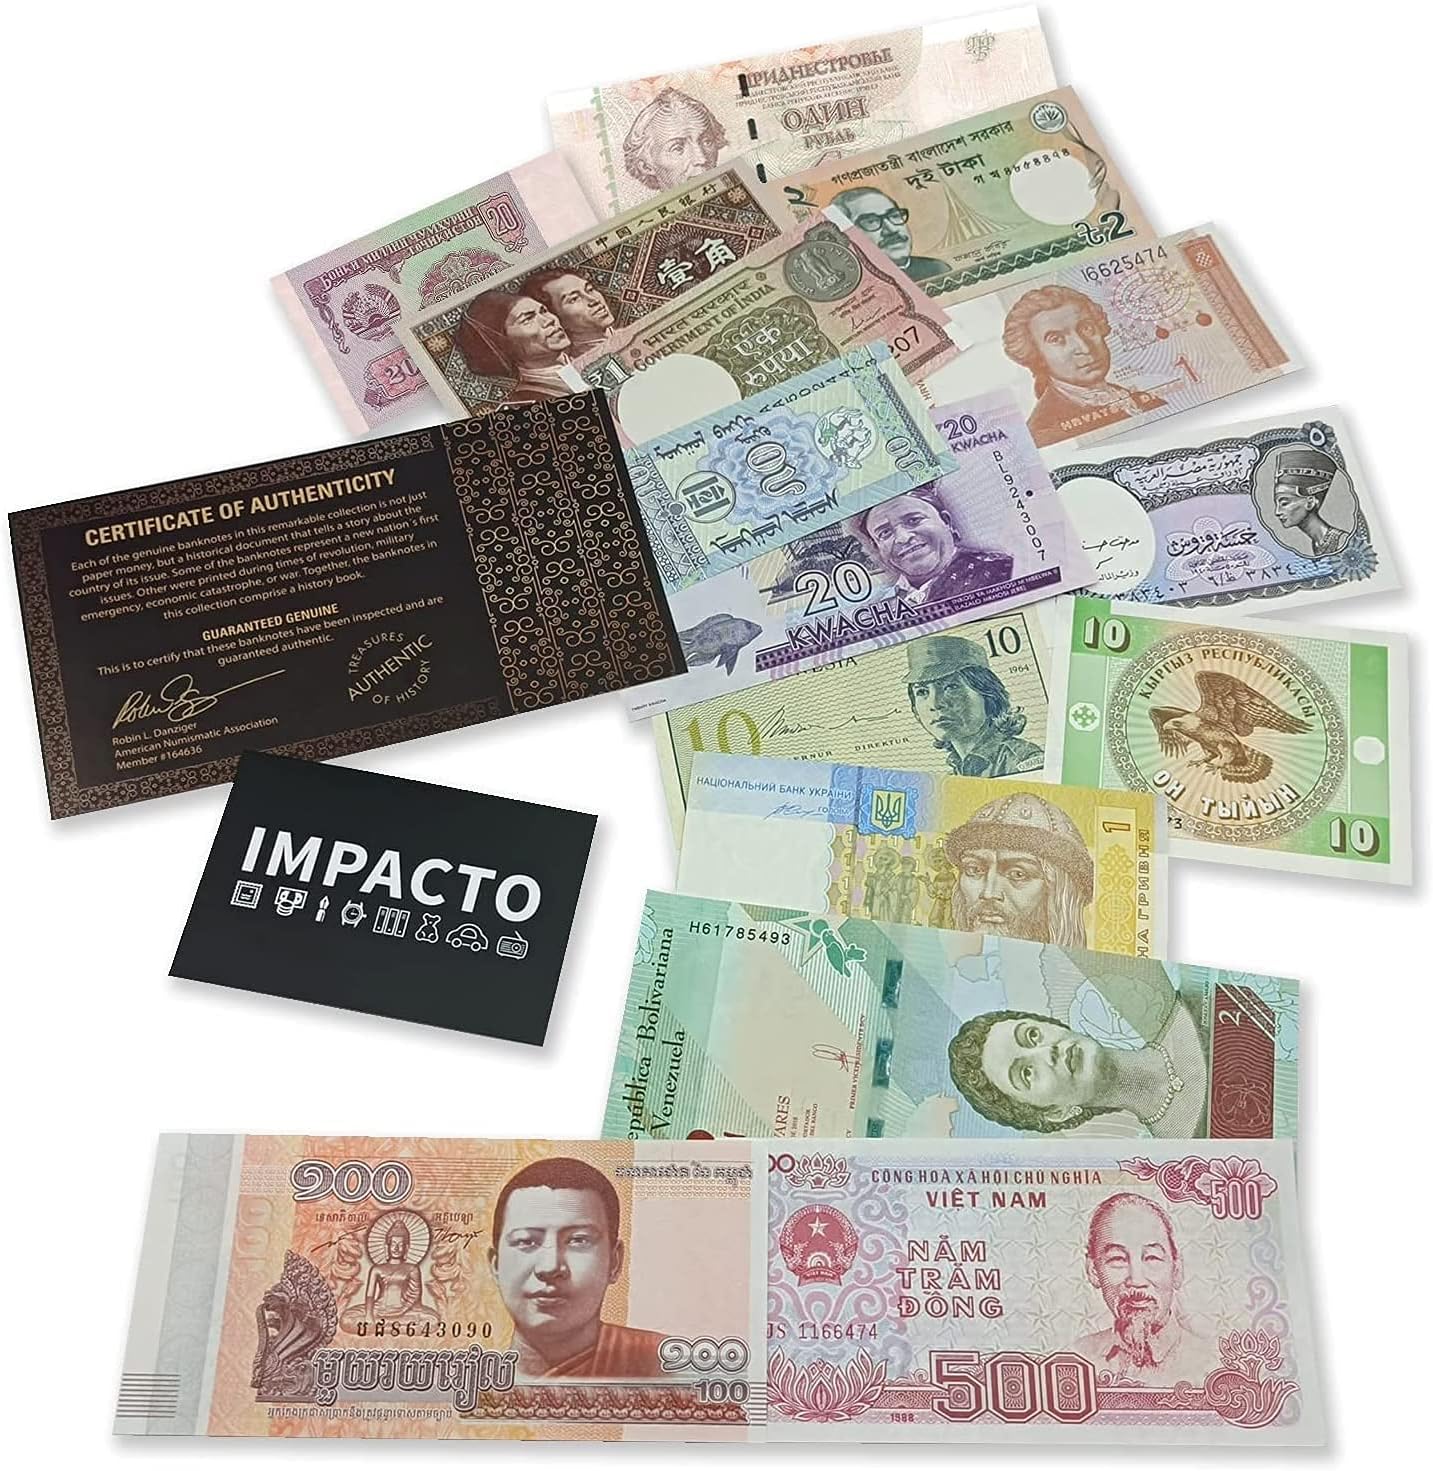 15 Uncirculated Banknotes from 15 Countries, No Duplications, with Certificate of Authenticity